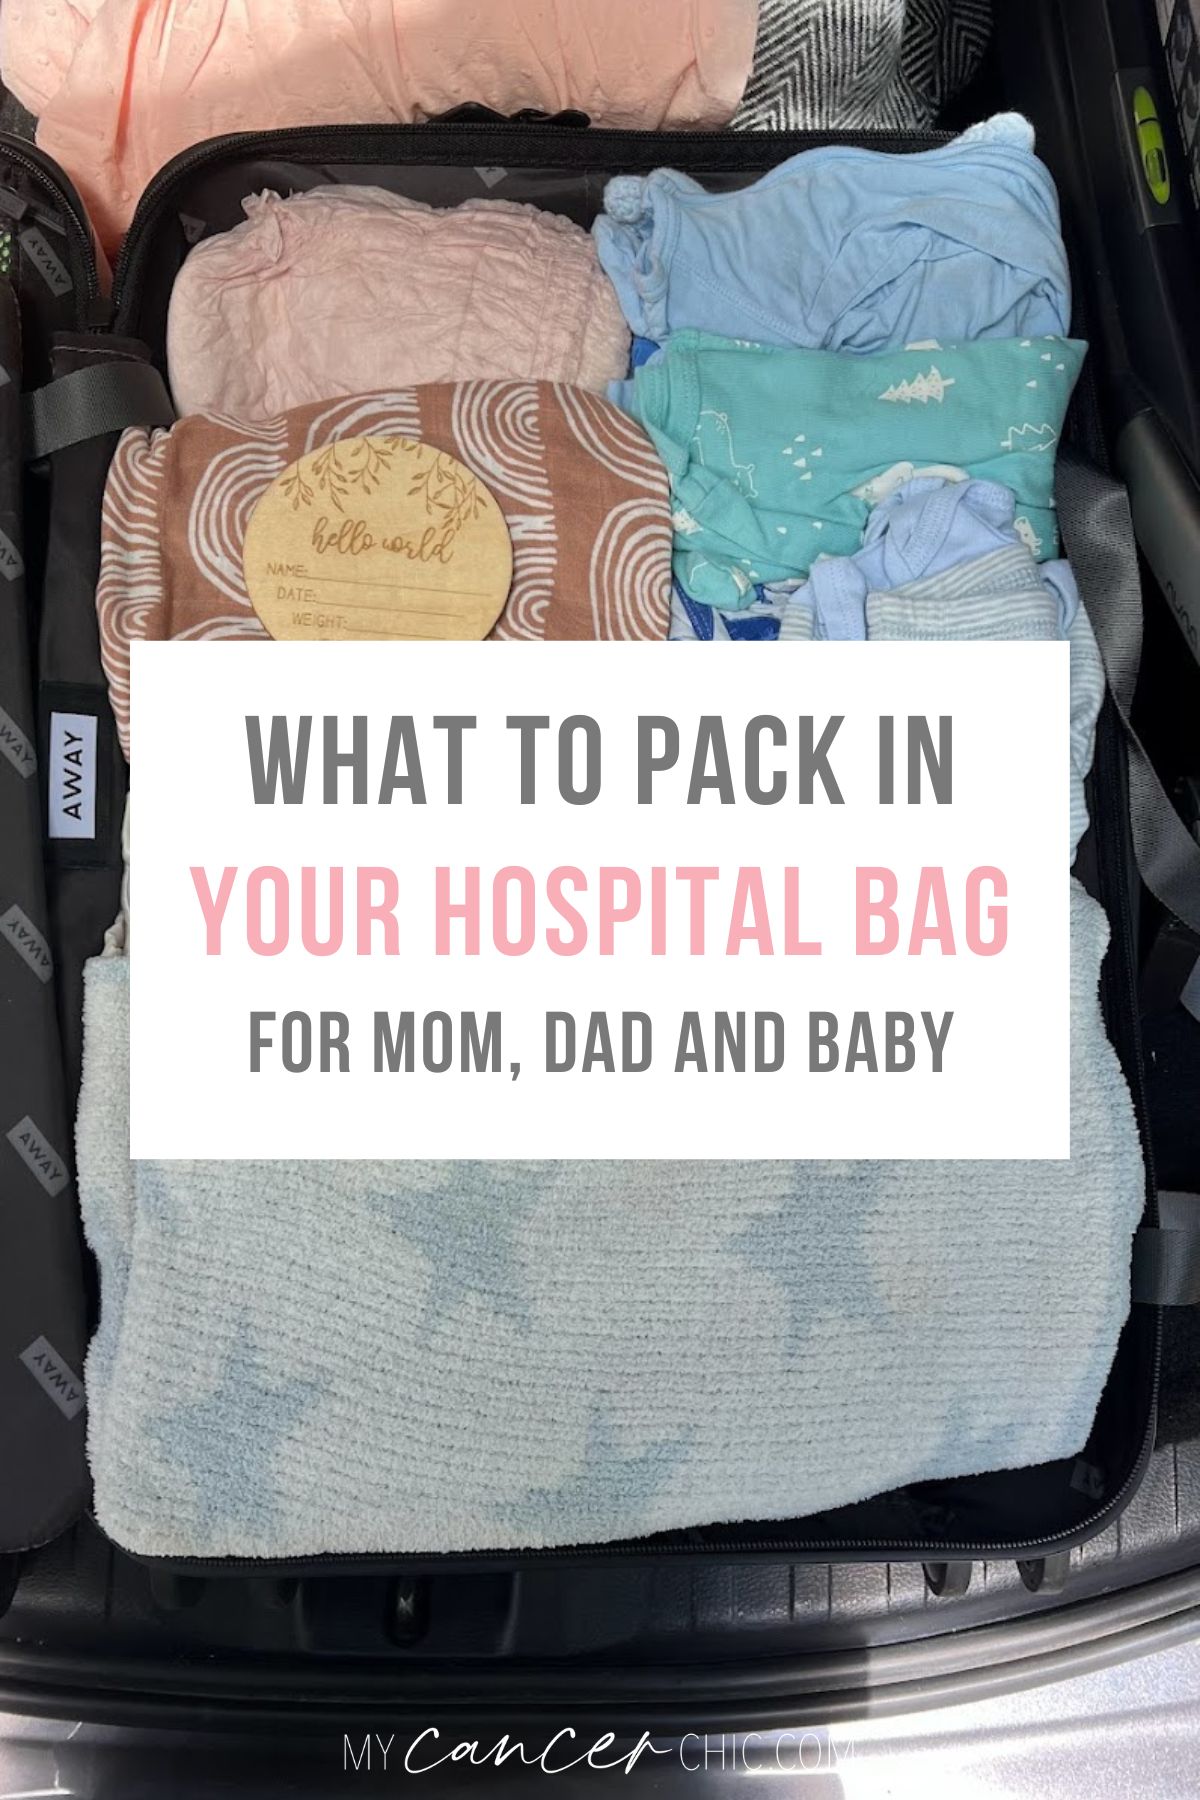 Hospital Bag Checklist for Your Due Date: Affordable Essentials & Must-Haves